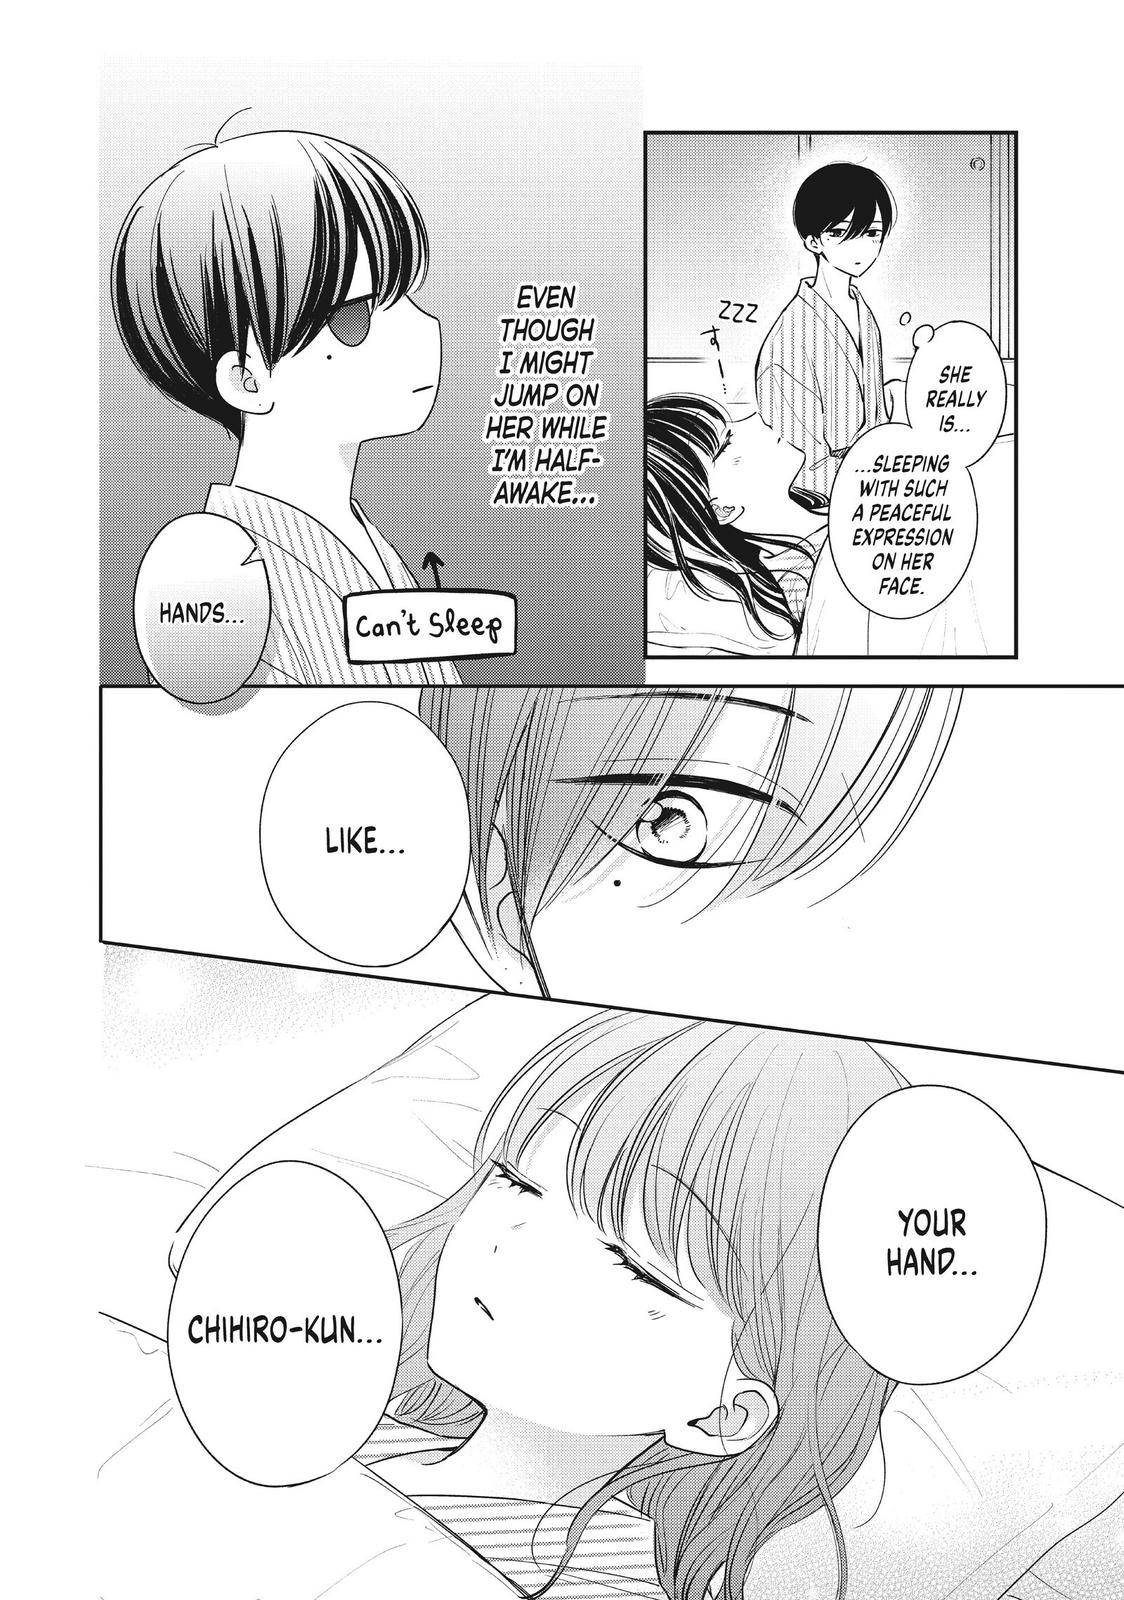 Chihiro-kun Only Has Eyes for Me - chapter 24.5 - #2